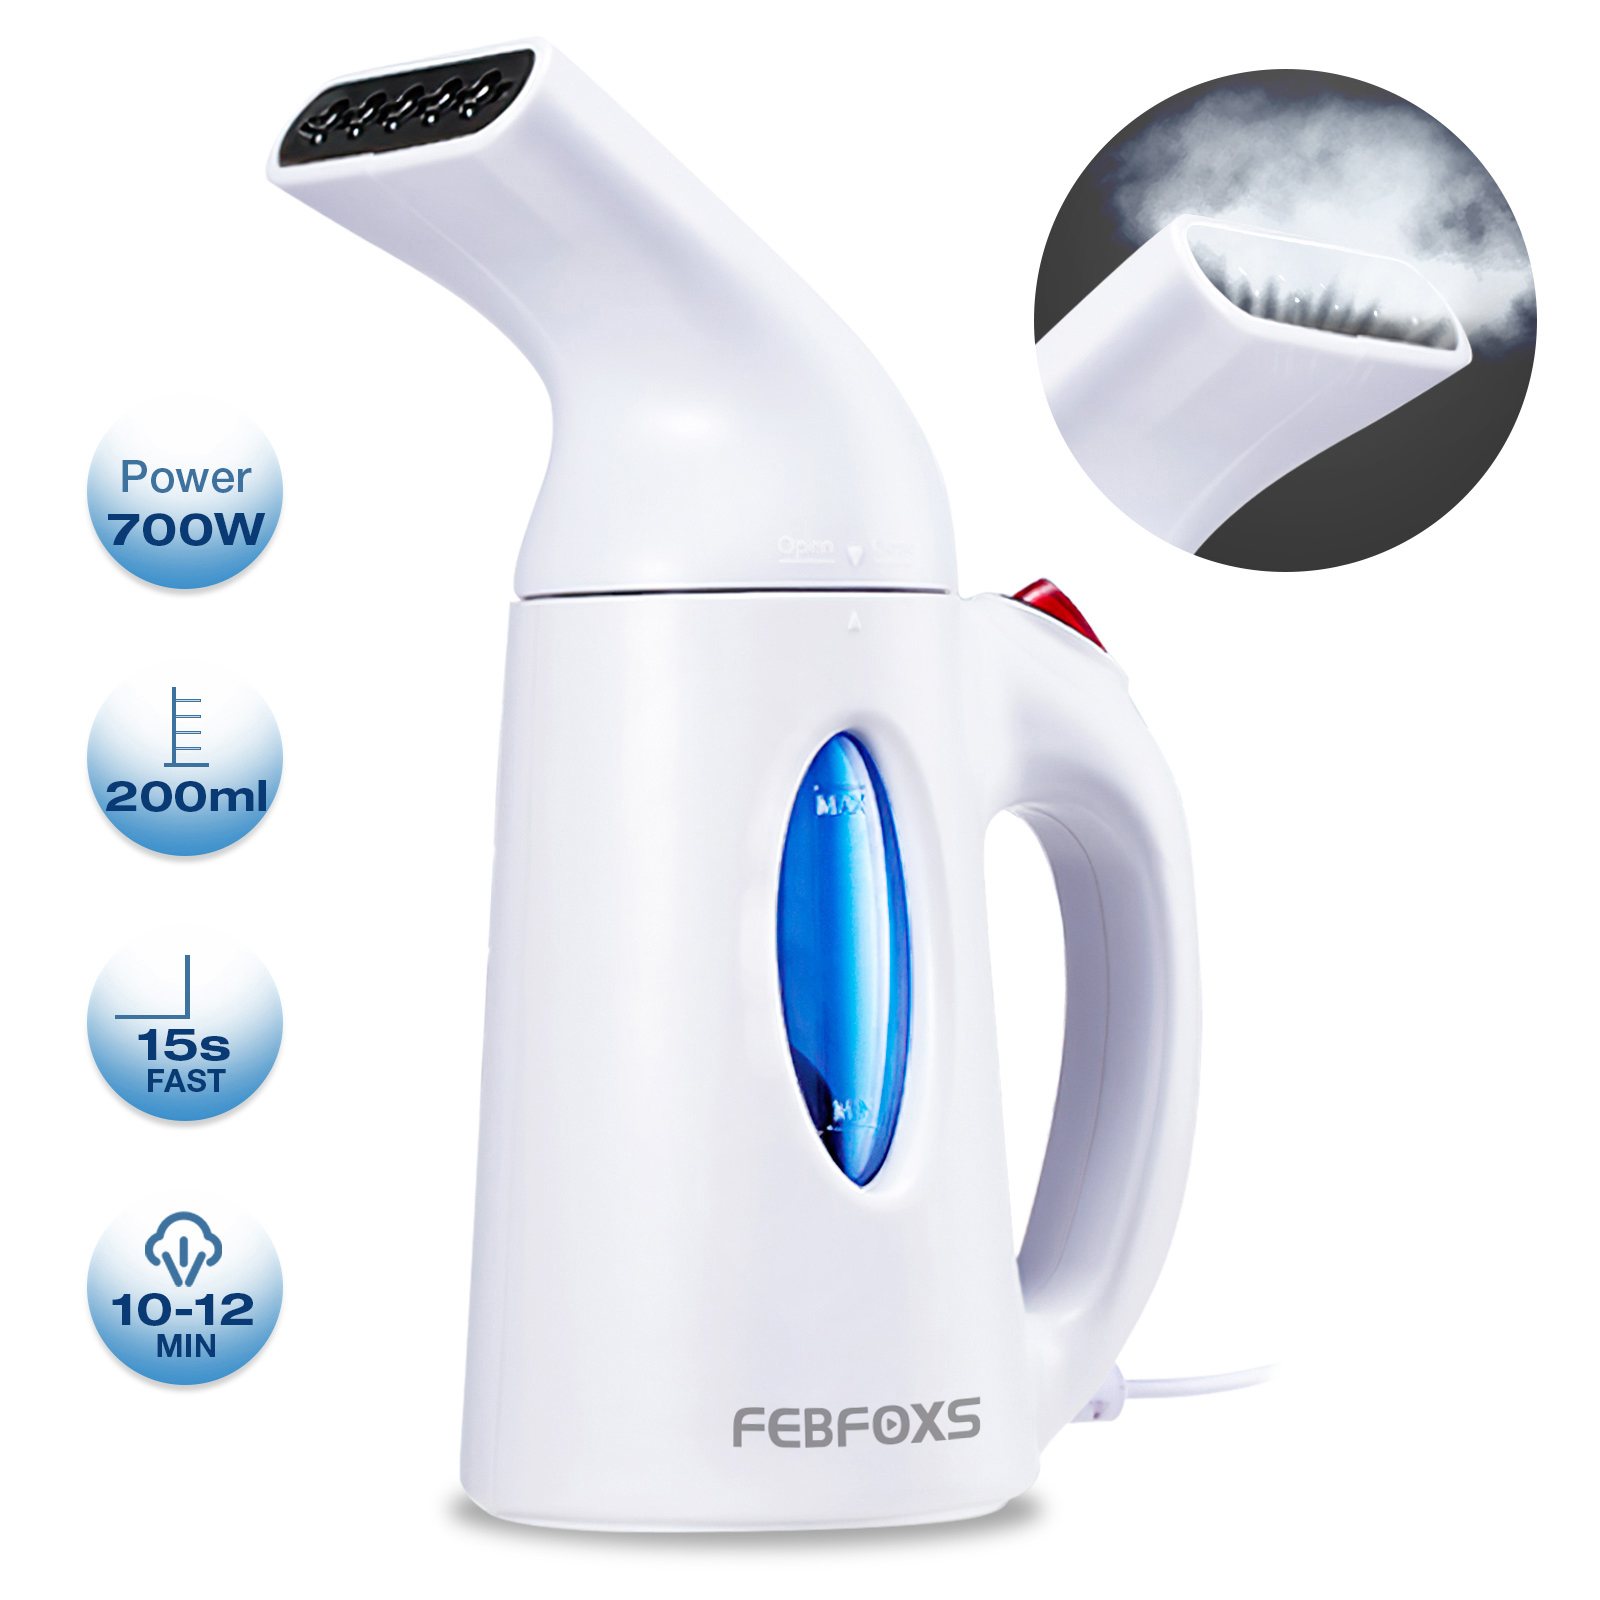 FEBFOXS Steamer for Clothes,700w Portable Garment Steamer,Auto Shut-off Function,Wrinkles/Steam/Soften/Clean/Sterilize,White - image 1 of 8